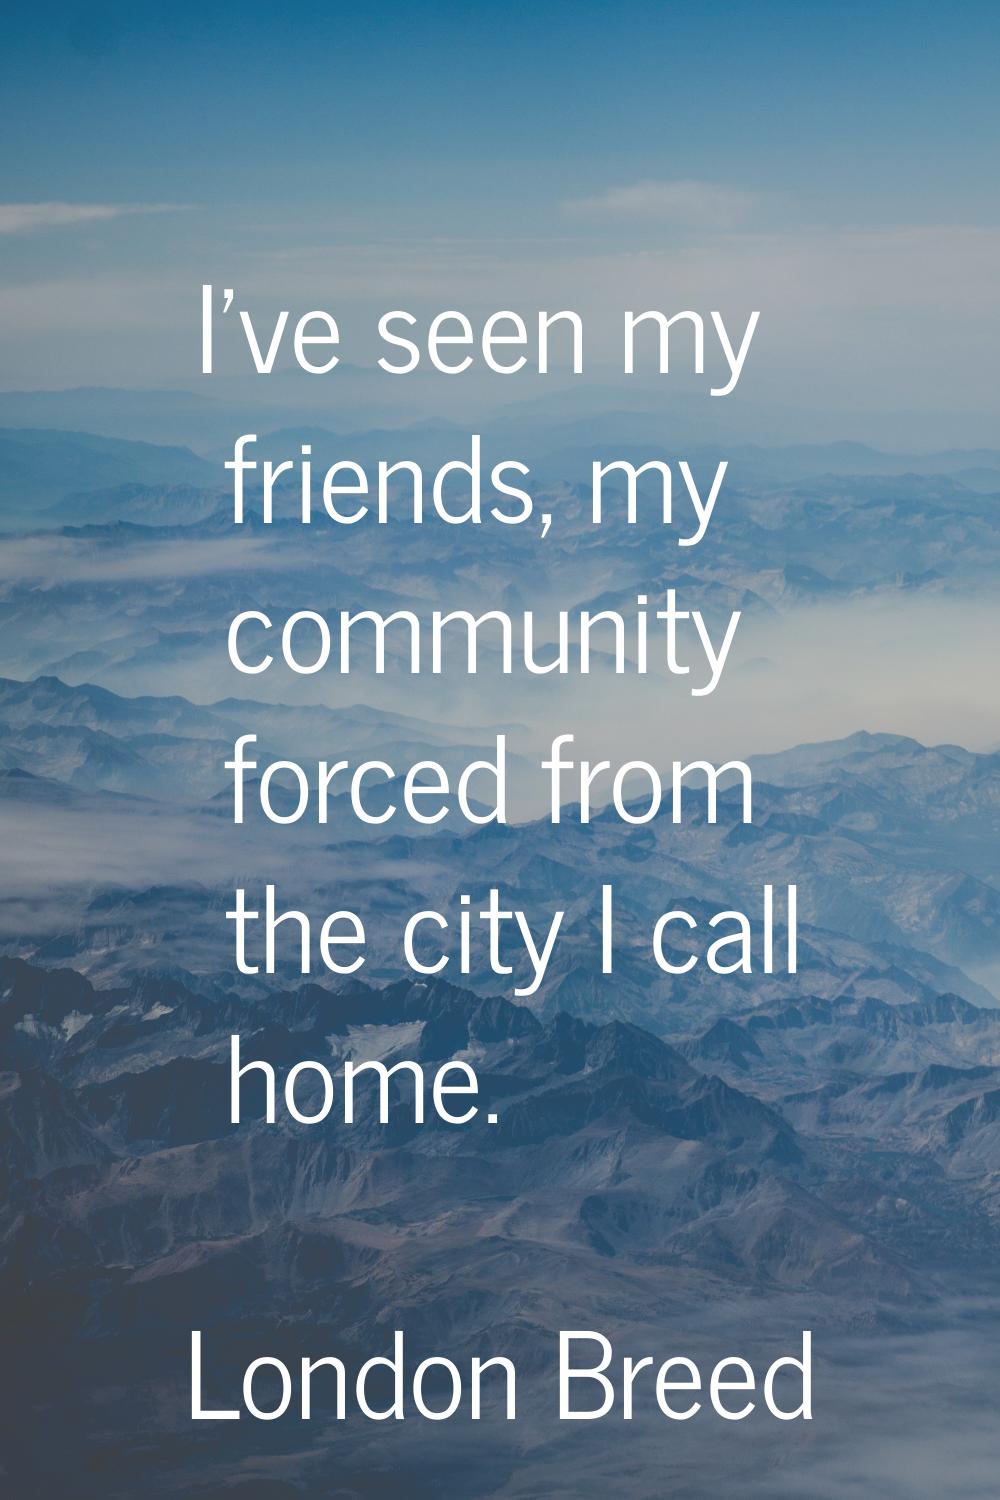 I've seen my friends, my community forced from the city I call home.